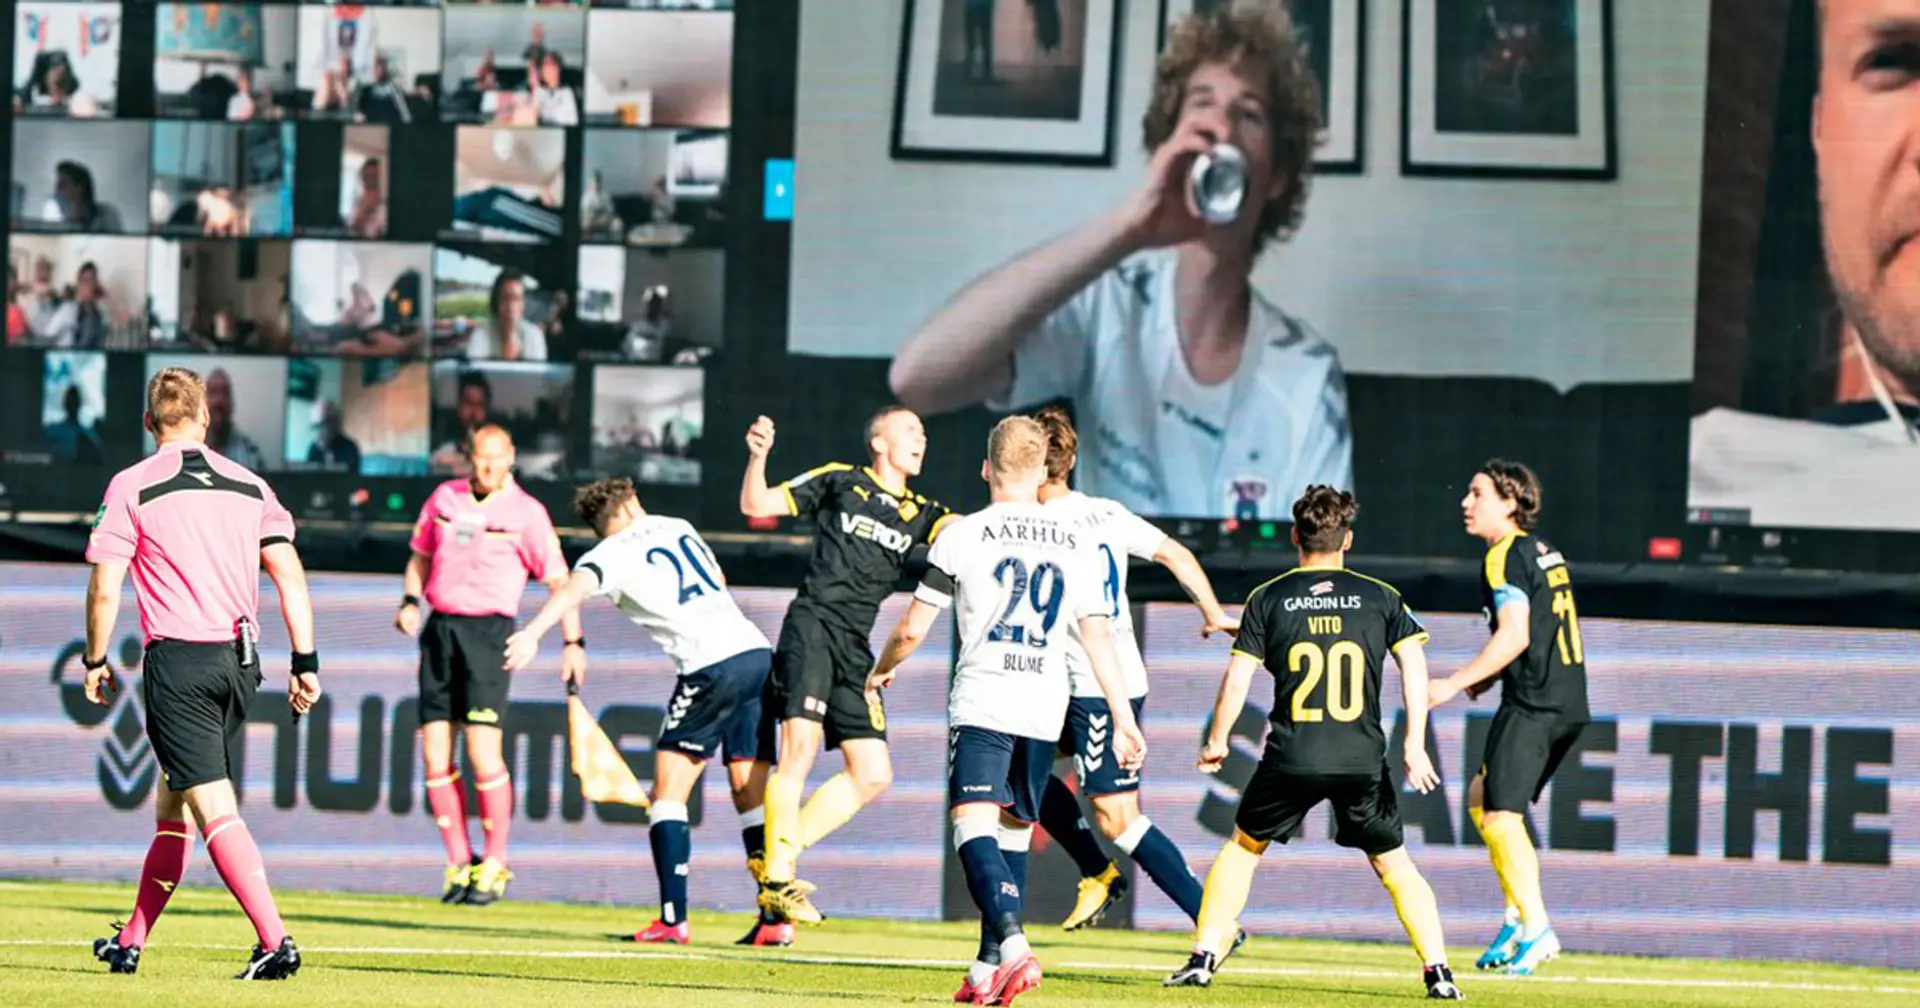 Zoom in! Danish club Aarhus brings into life arguably the most futuristic concept of watching football